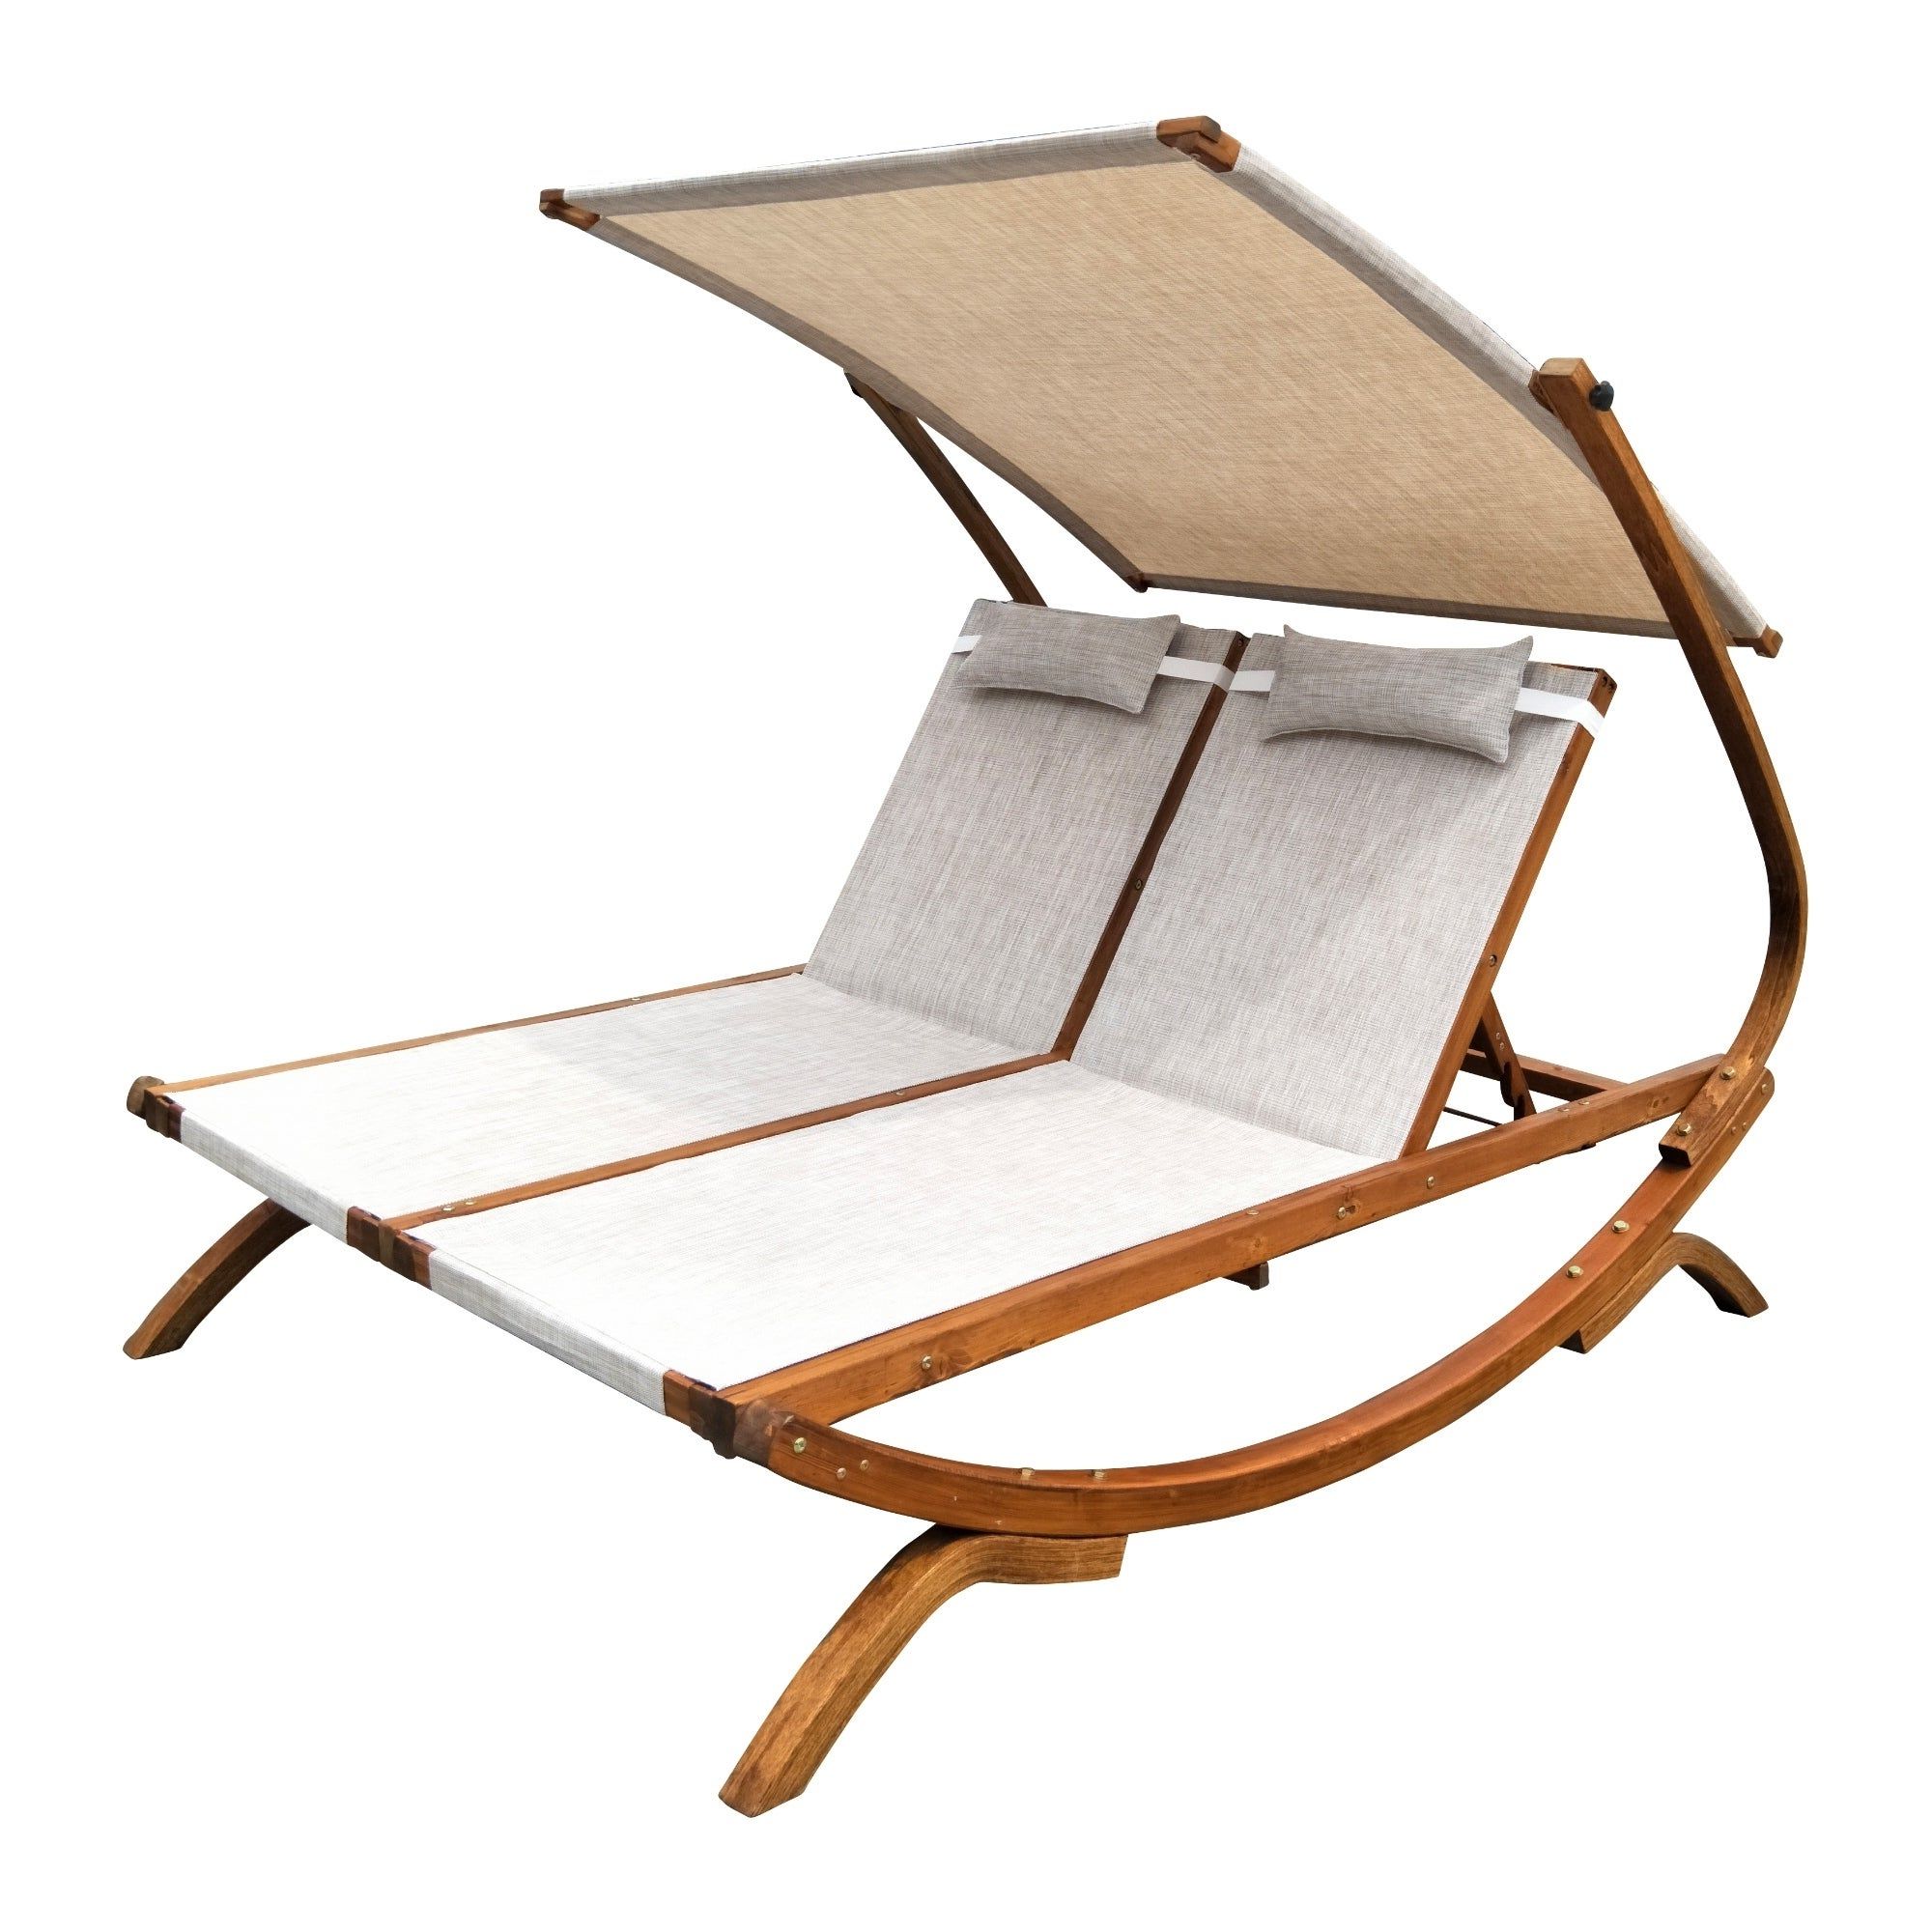 Double Reclining Lounge Chair With Canopy In Fashionable Double Reclining Lounge Chairs With Canopy (View 1 of 25)